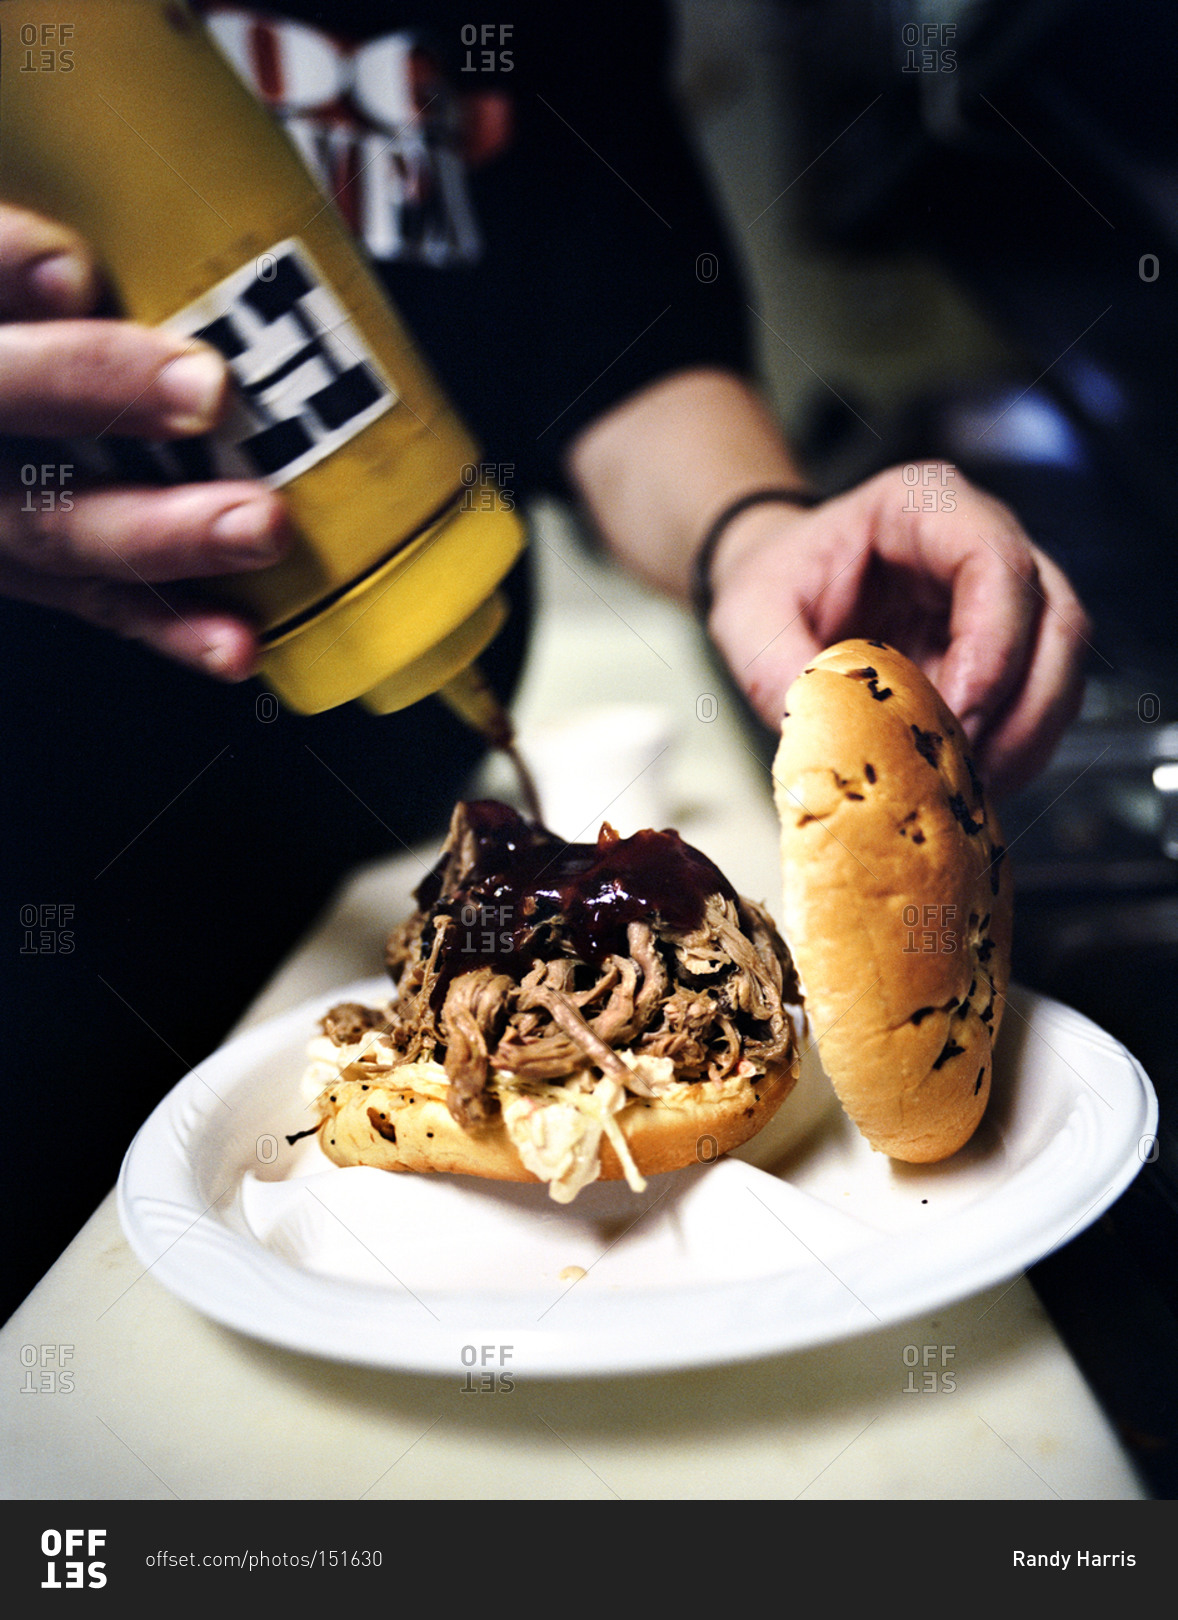 Person adding special hog heaven sauce to a pulled pork sandwich